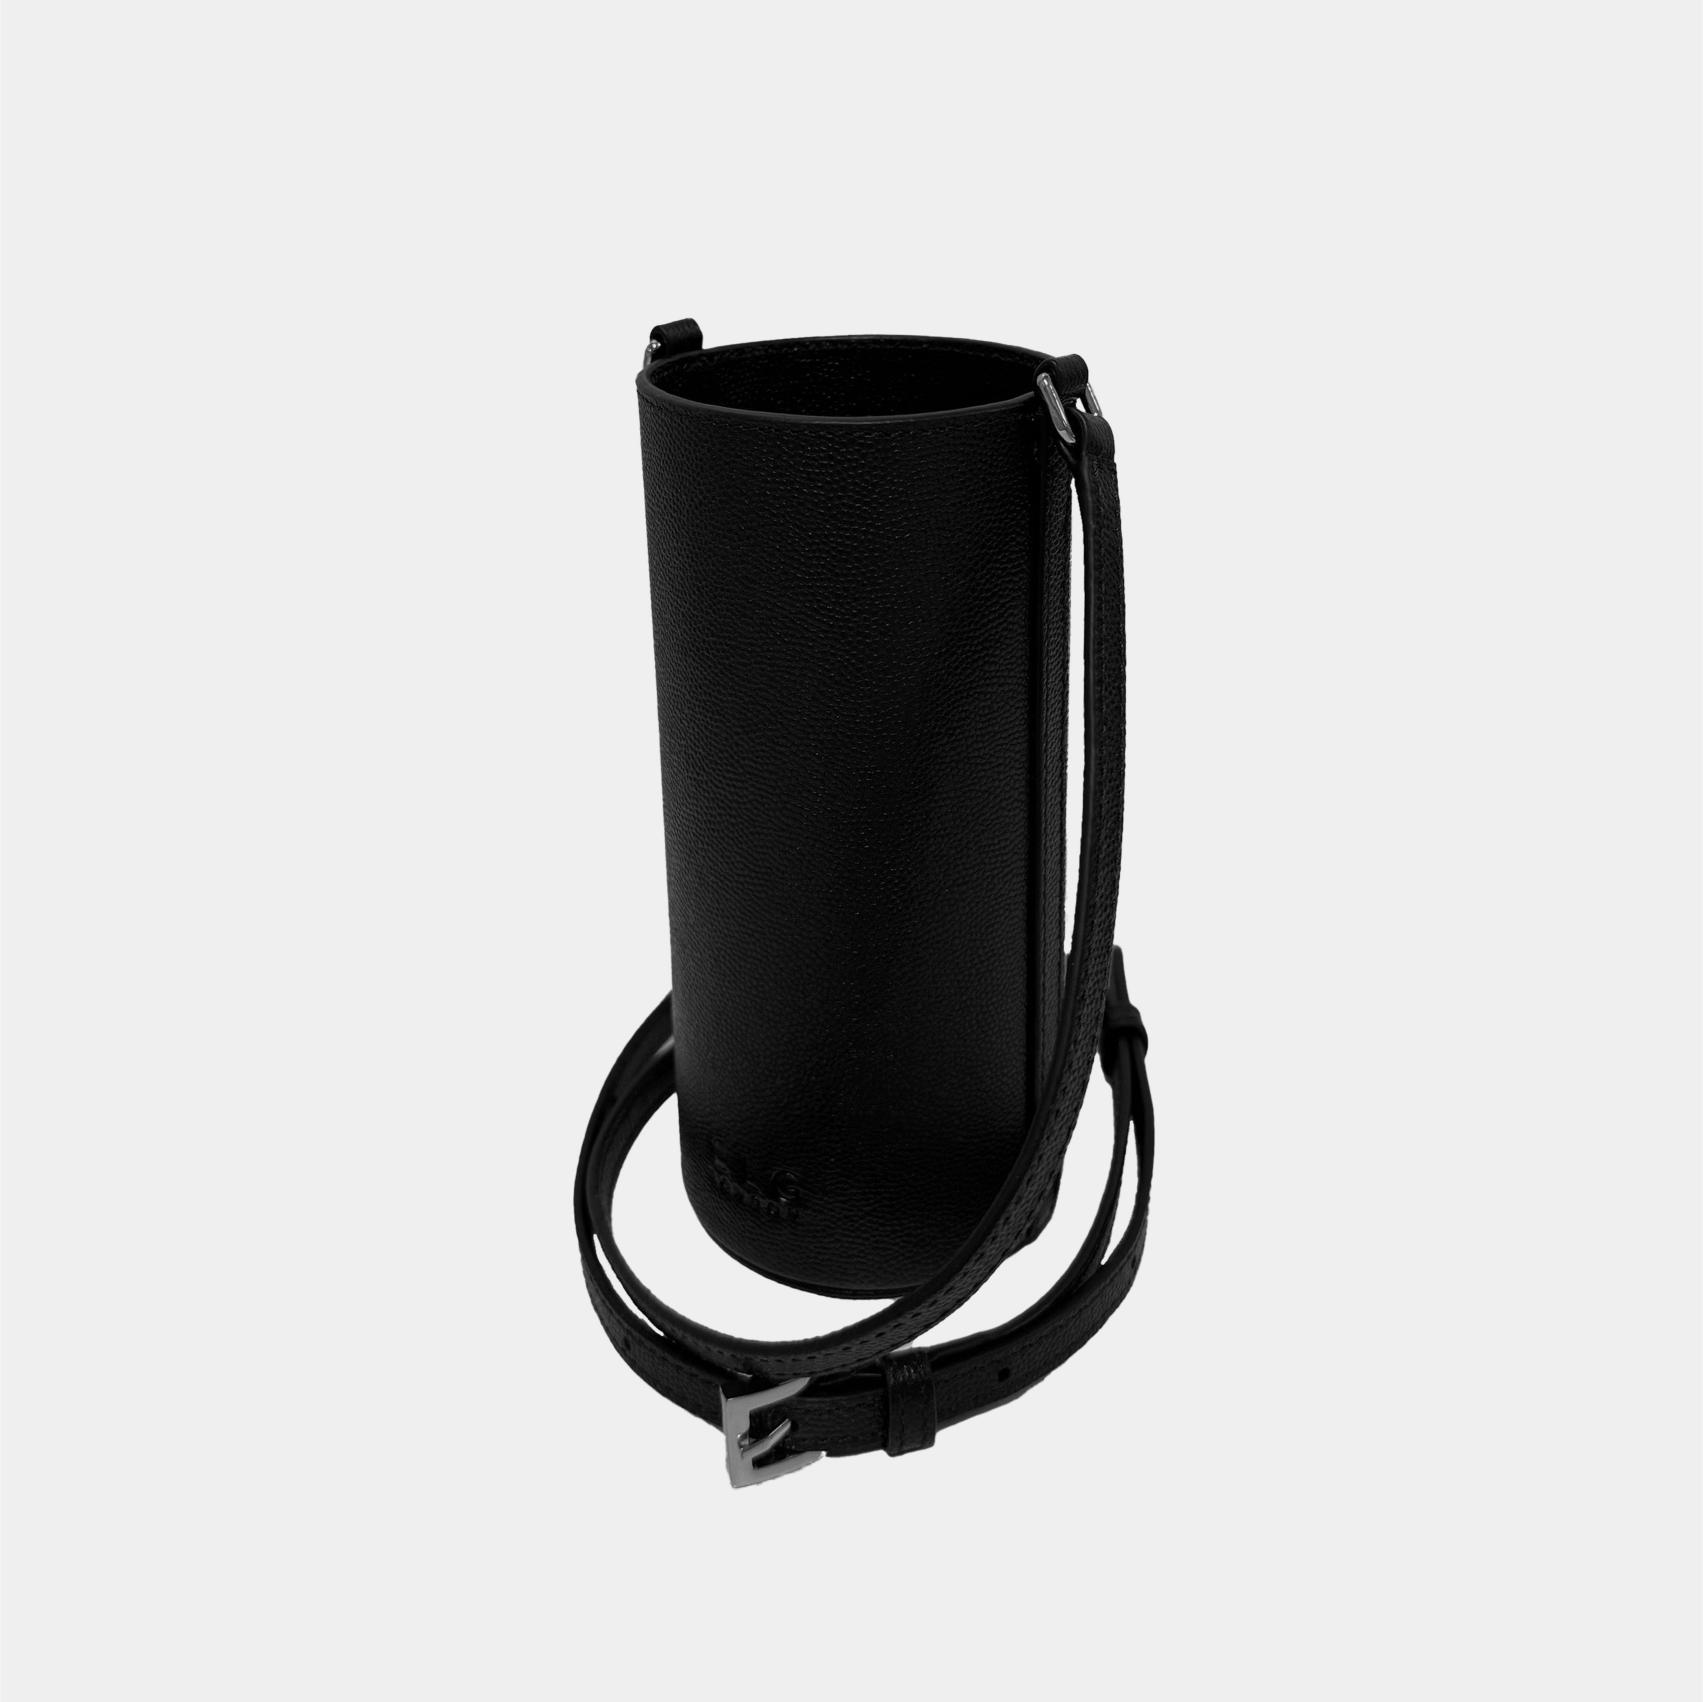 Leather water bottle holder made to order with your Company colours and branding